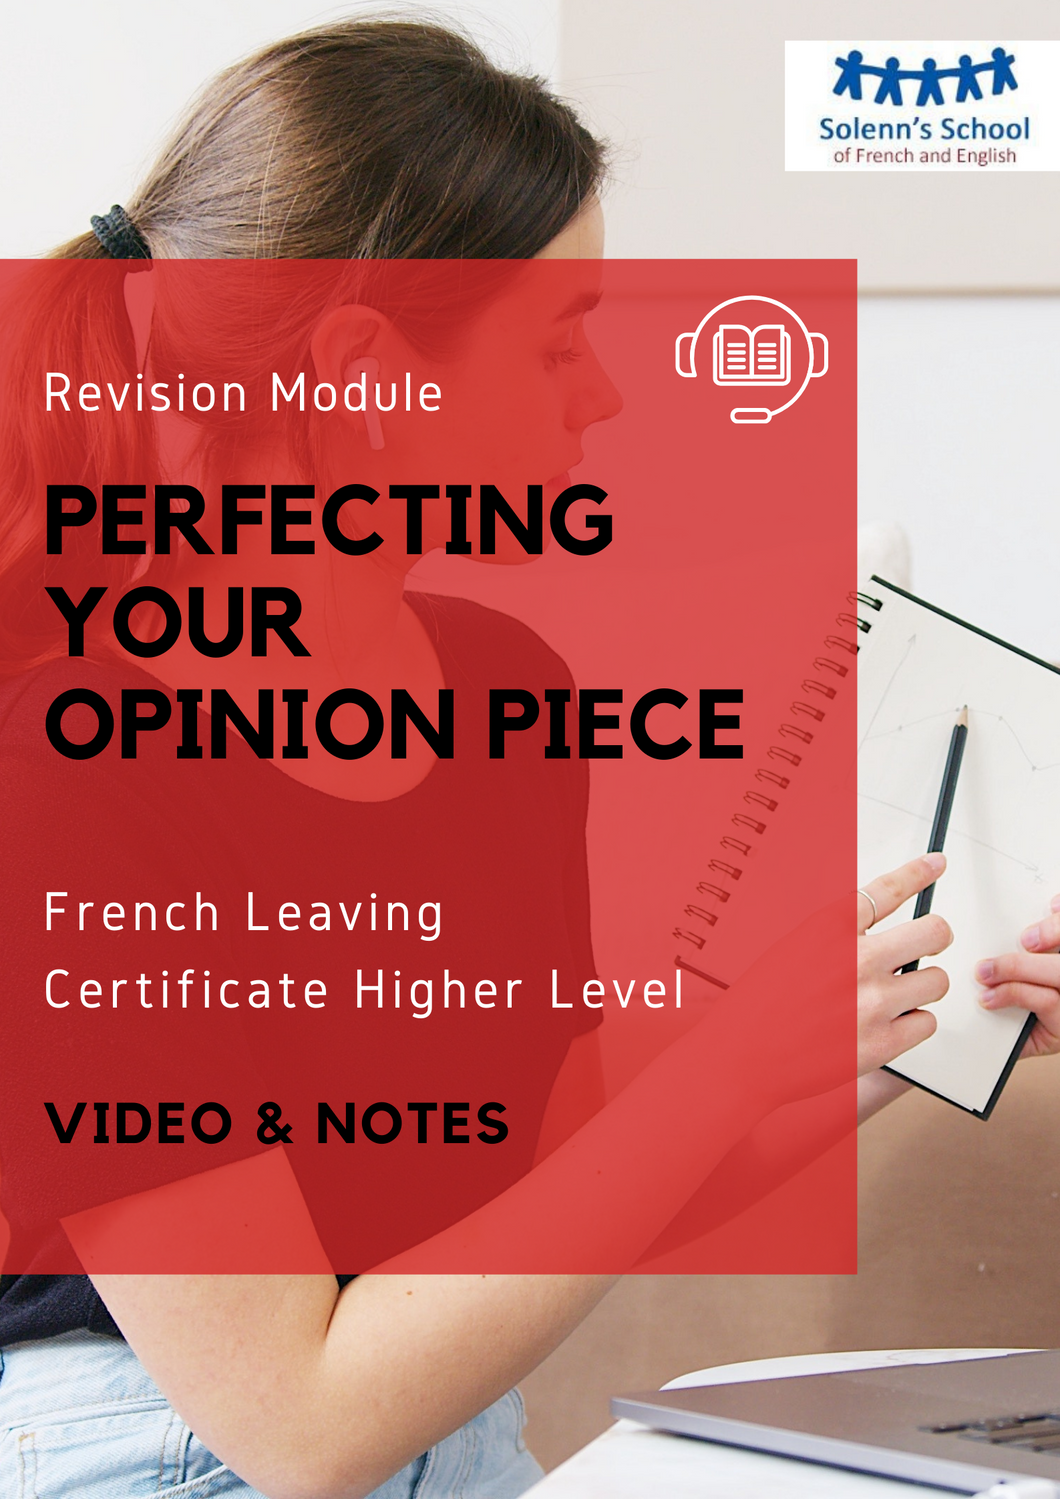 French LC Revision Course: Perfecting Your Opinion Piece